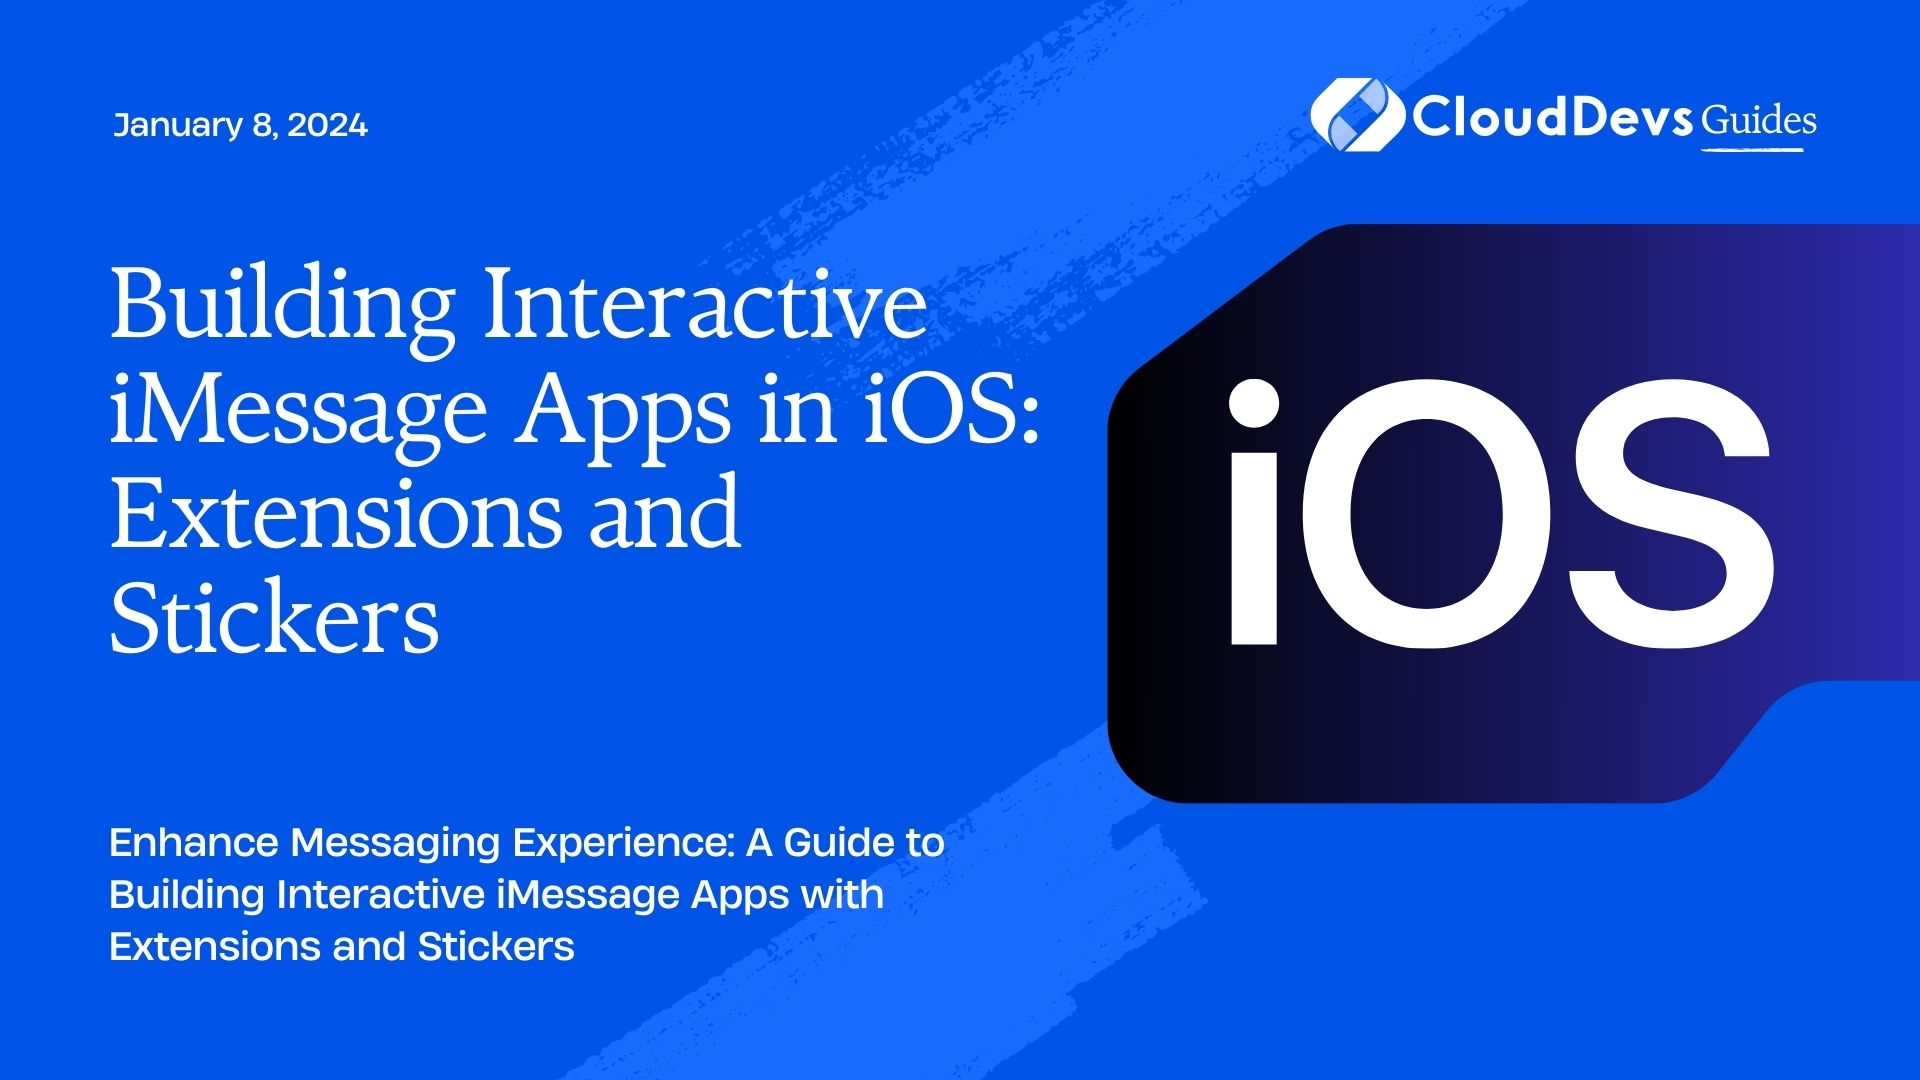 Building Interactive iMessage Apps in iOS: Extensions and Stickers